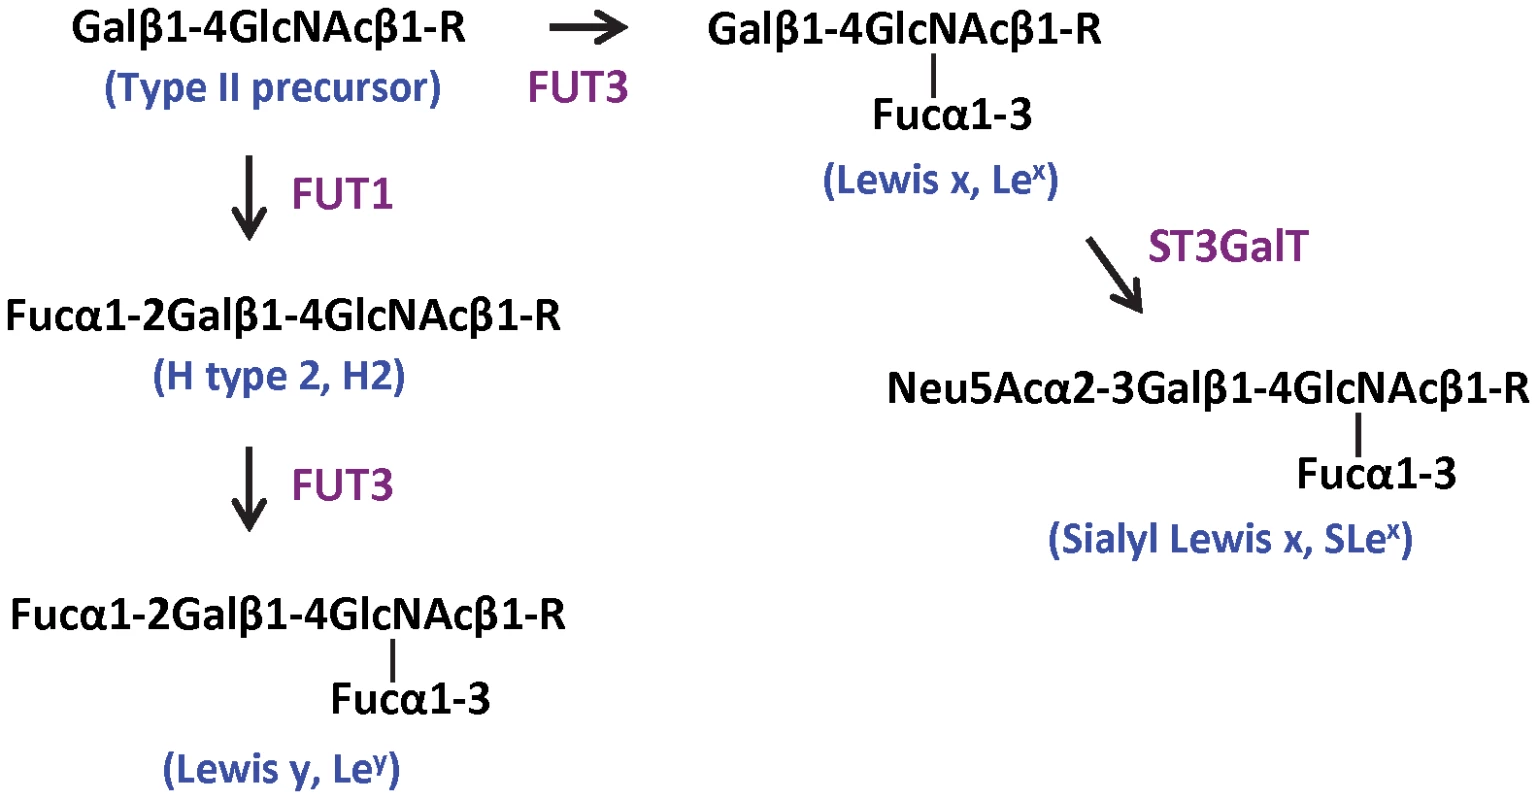 Biosynthesis pathways of Lewis y and sialyl Lewis x starting from the type II precursor (Galβ1–4GlcNAcβ1-R).